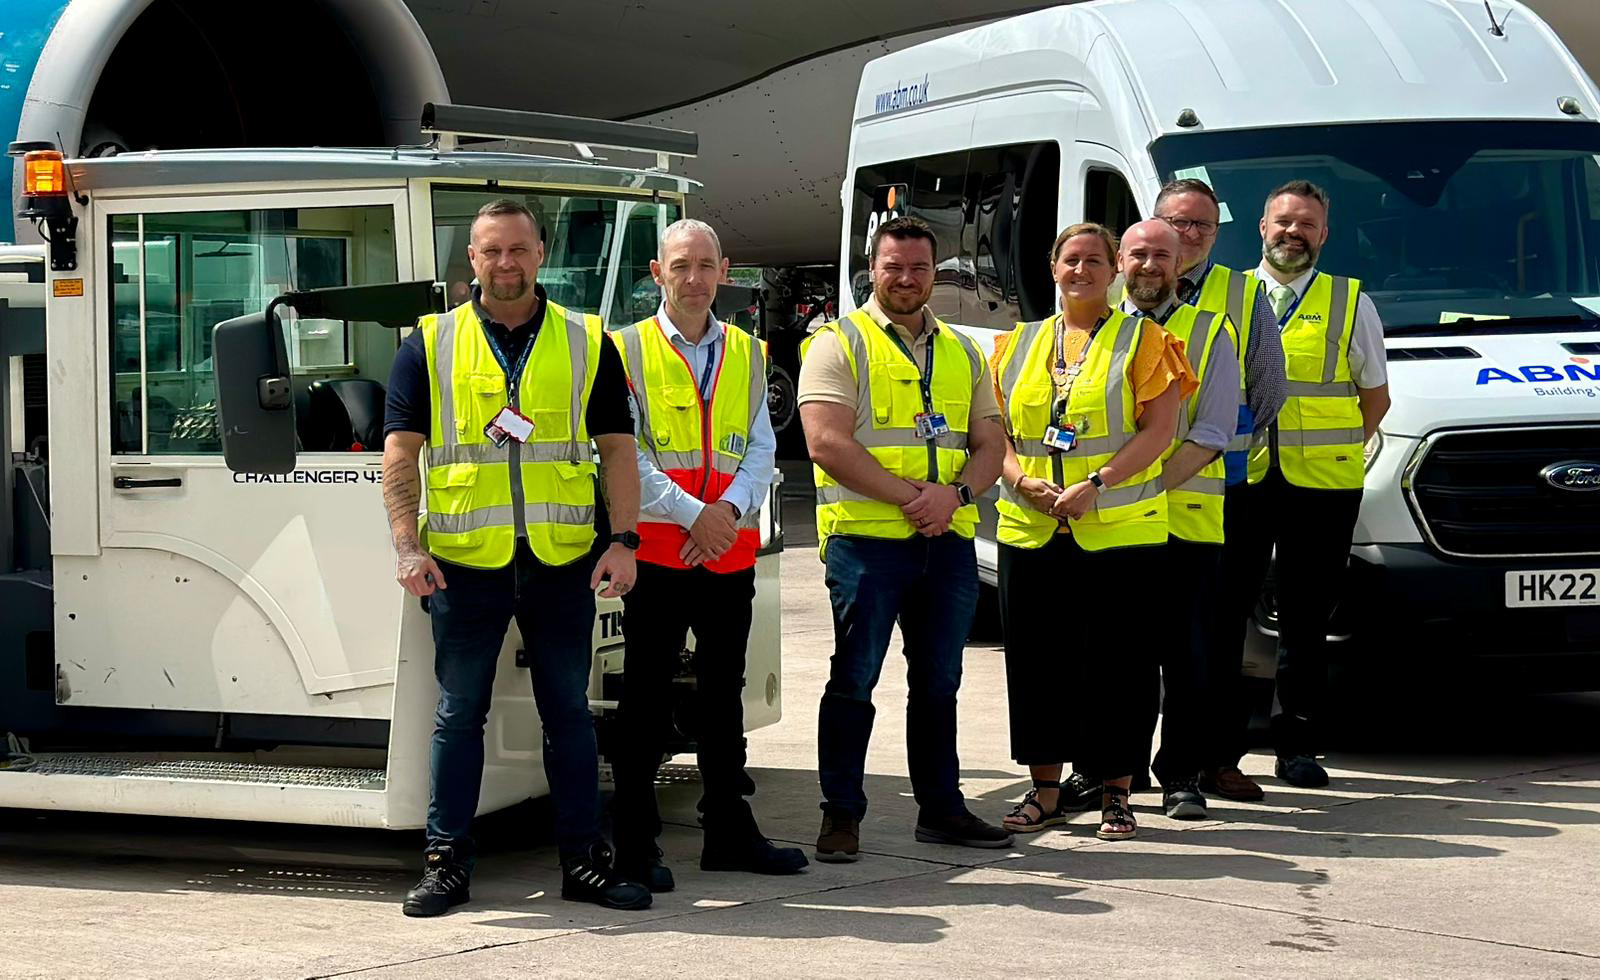 ABM DOUBLES CABIN CLEANING PRESENCE AT MANCHESTER AIRPORT 